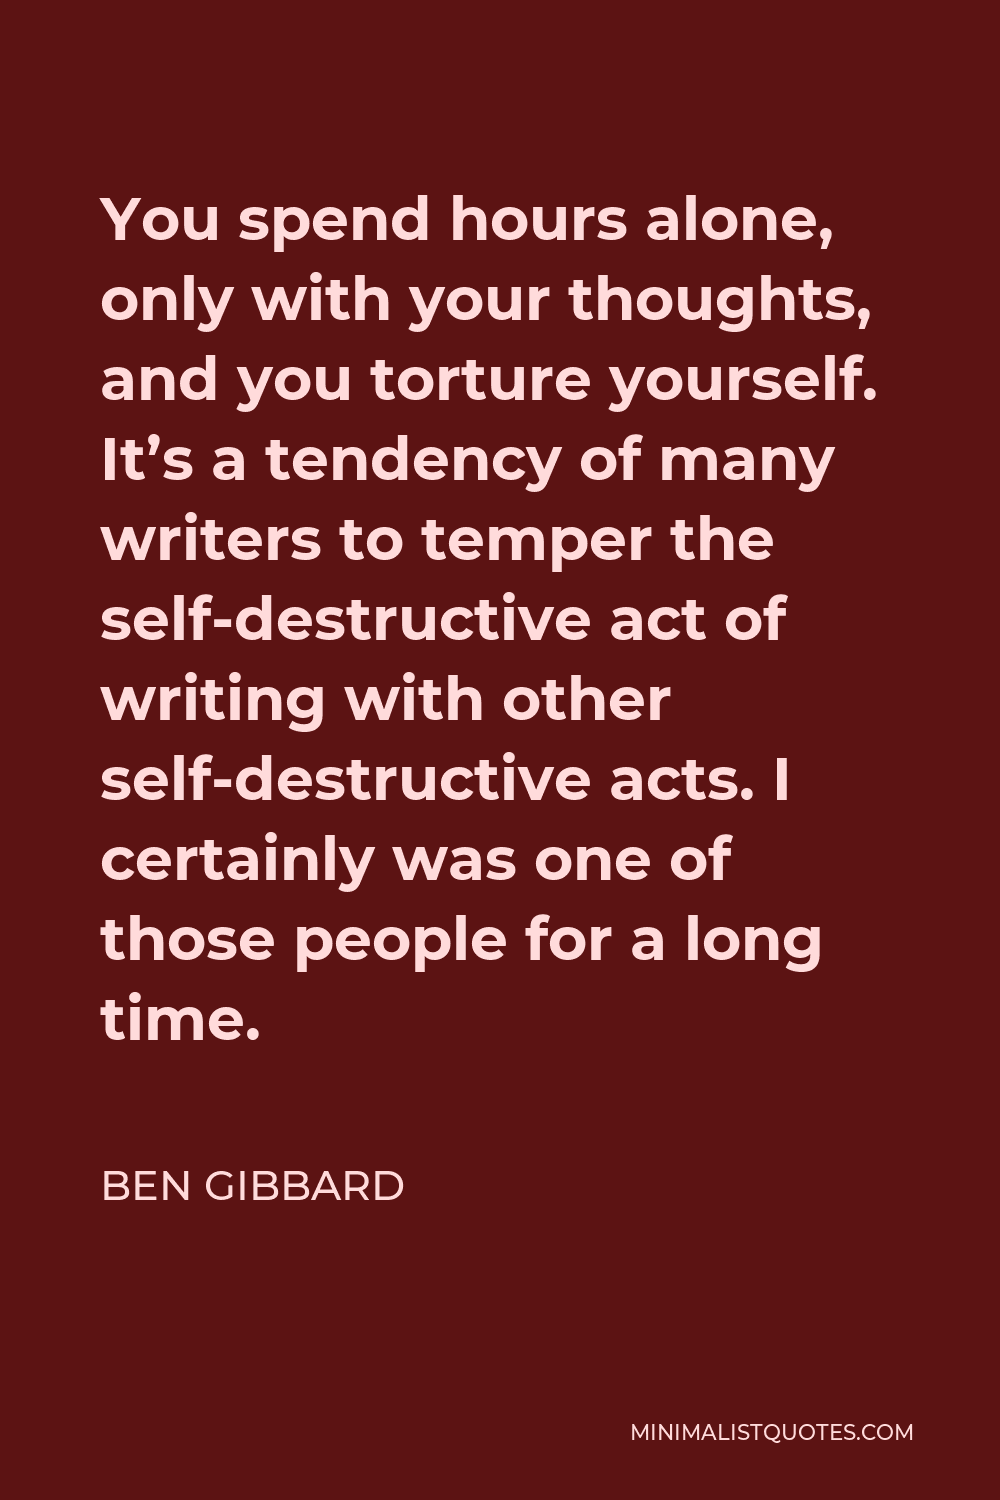 Ben Gibbard Quote - You spend hours alone, only with your thoughts, and you torture yourself. It’s a tendency of many writers to temper the self-destructive act of writing with other self-destructive acts. I certainly was one of those people for a long time.